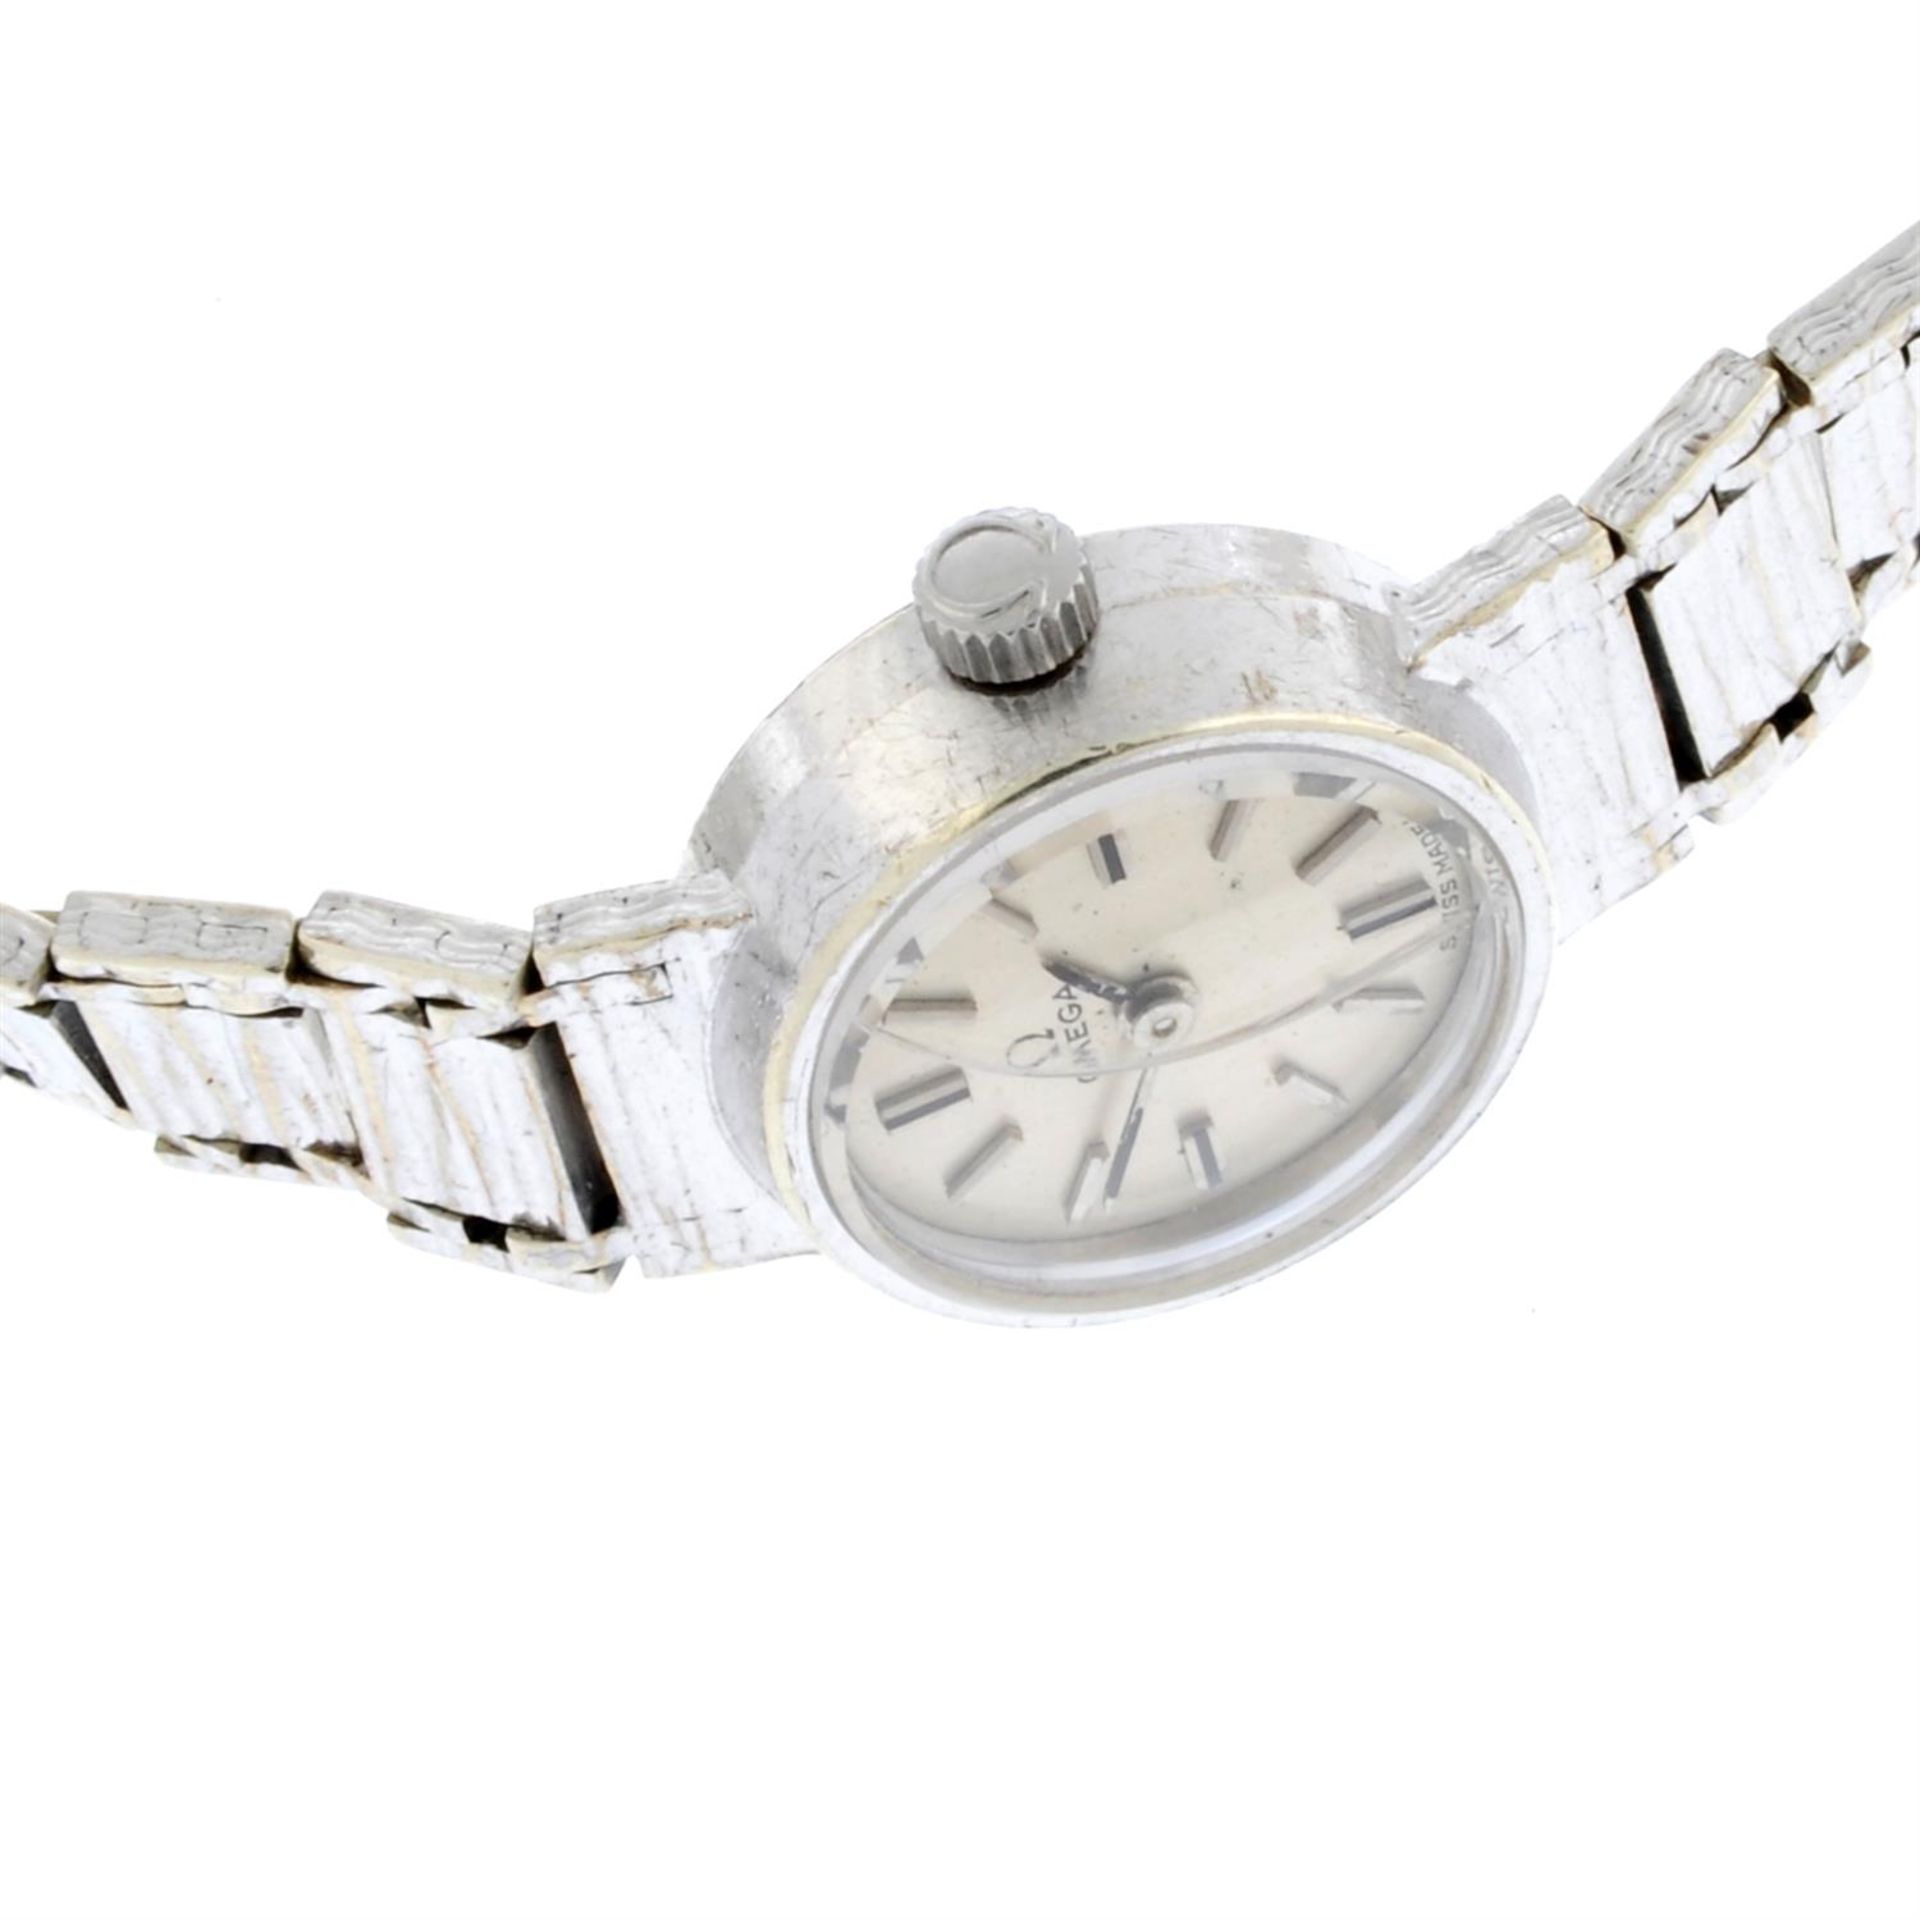 OMEGA - a 9ct white gold bracelet watch, 14mm. - Image 3 of 4